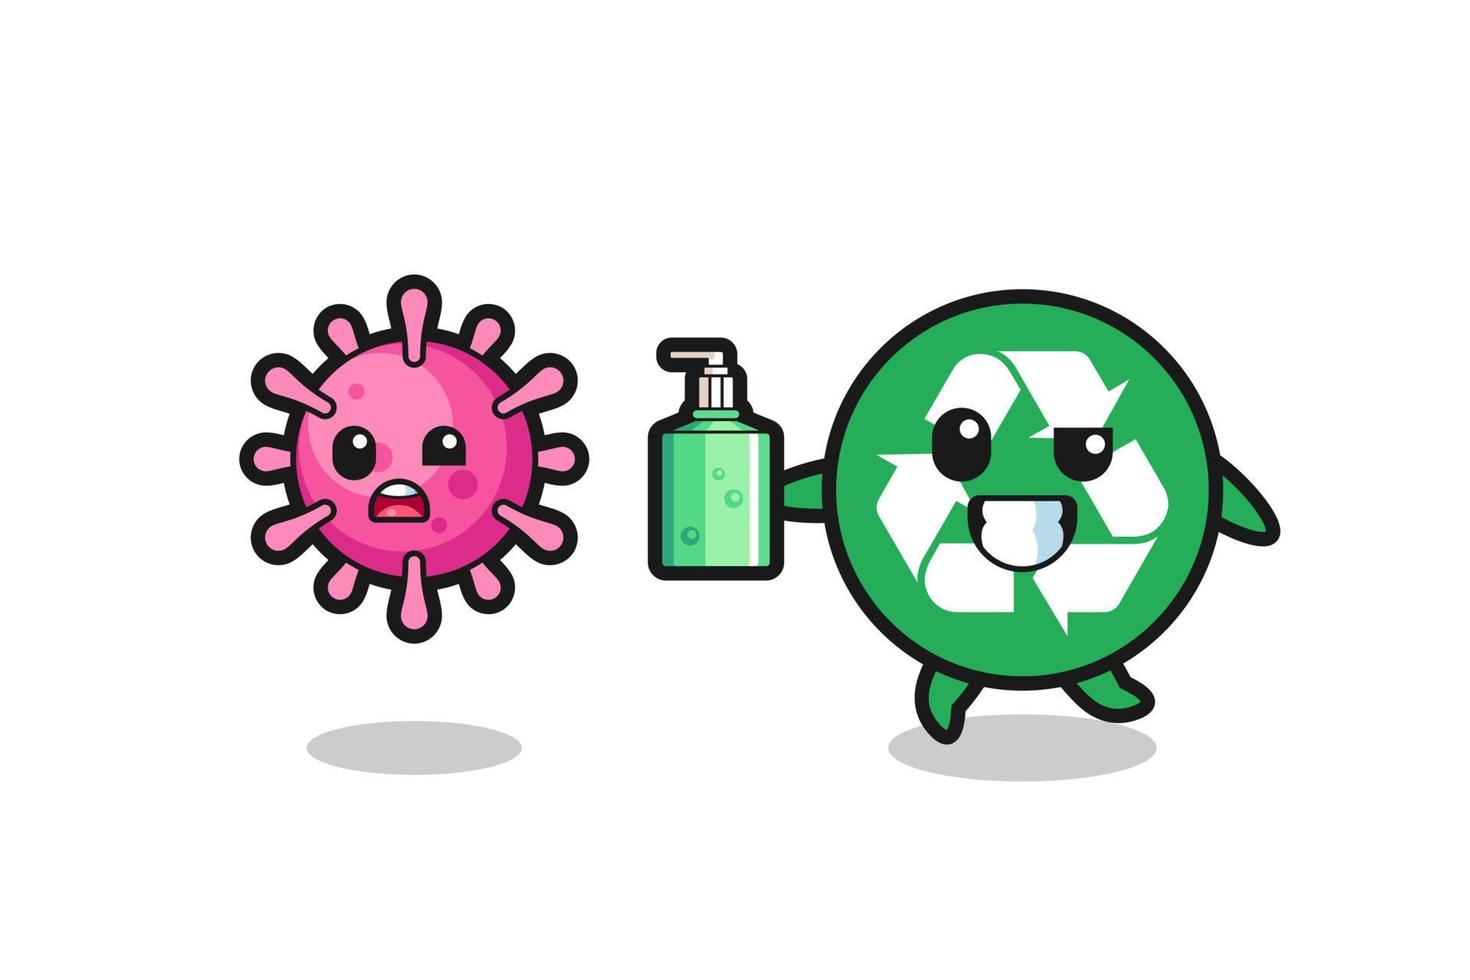 illustration of recycling character chasing evil virus with hand sanitizer vector